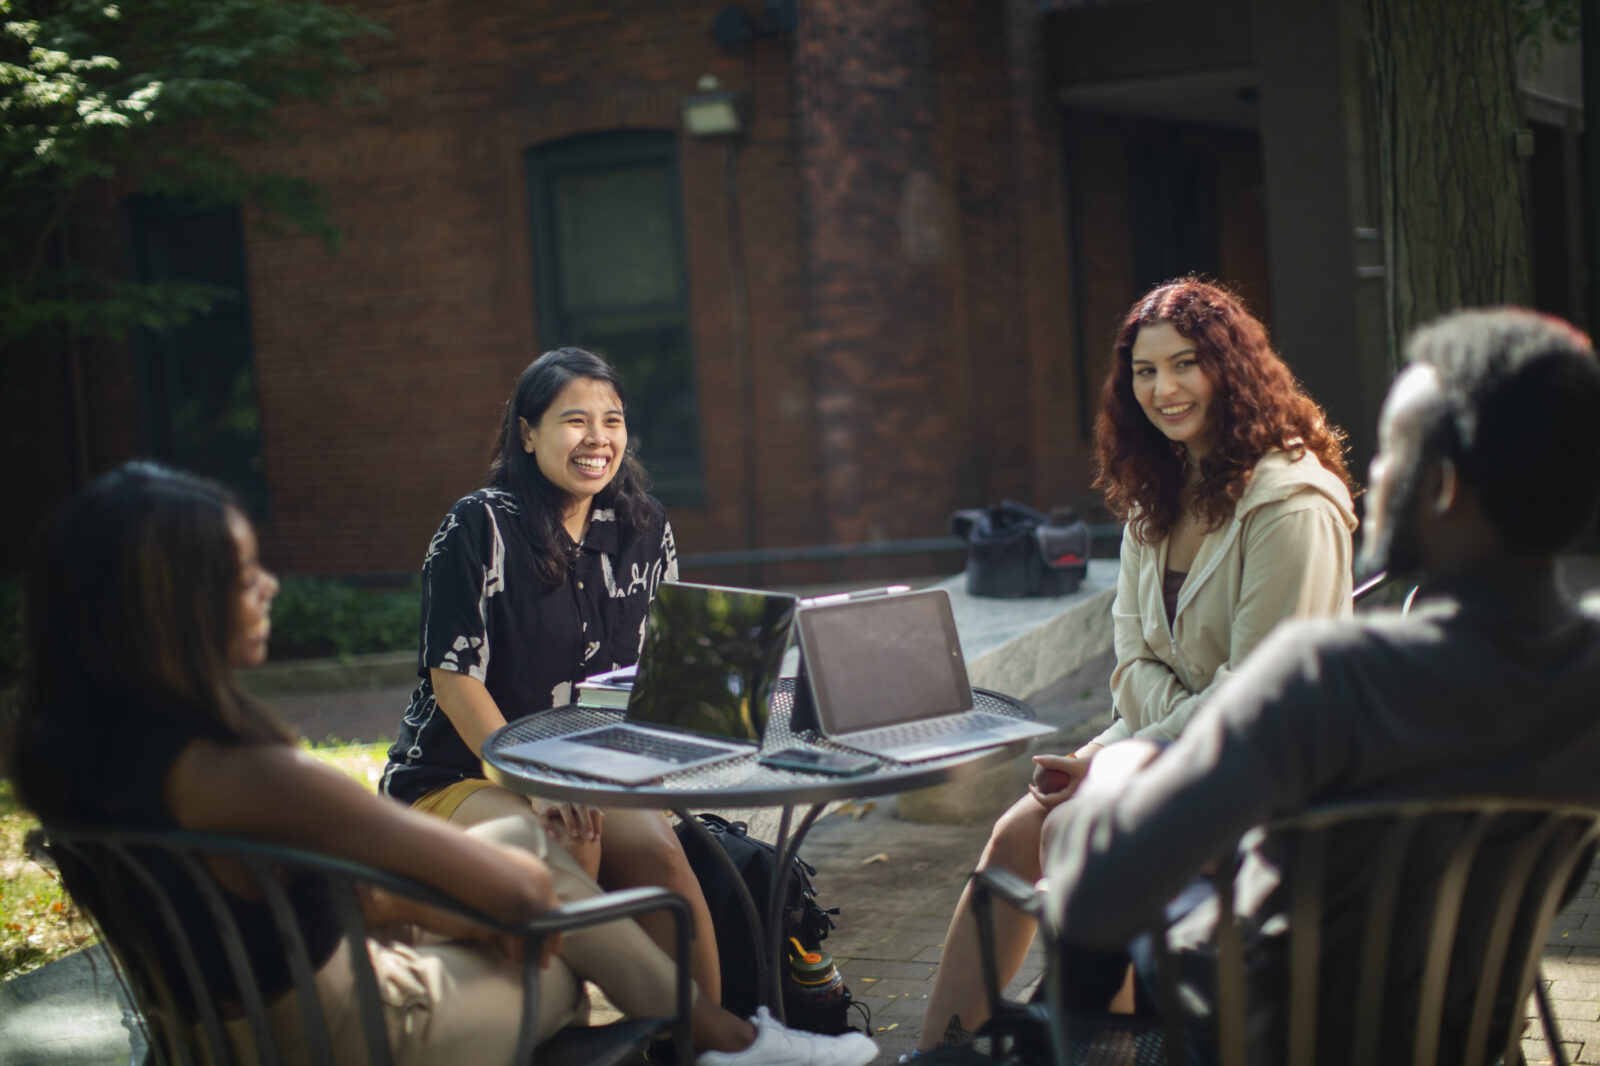 Four students sit smiling and conversing at a round table outdoors on campus. The photo is behind a transparent white layer on which text appears.